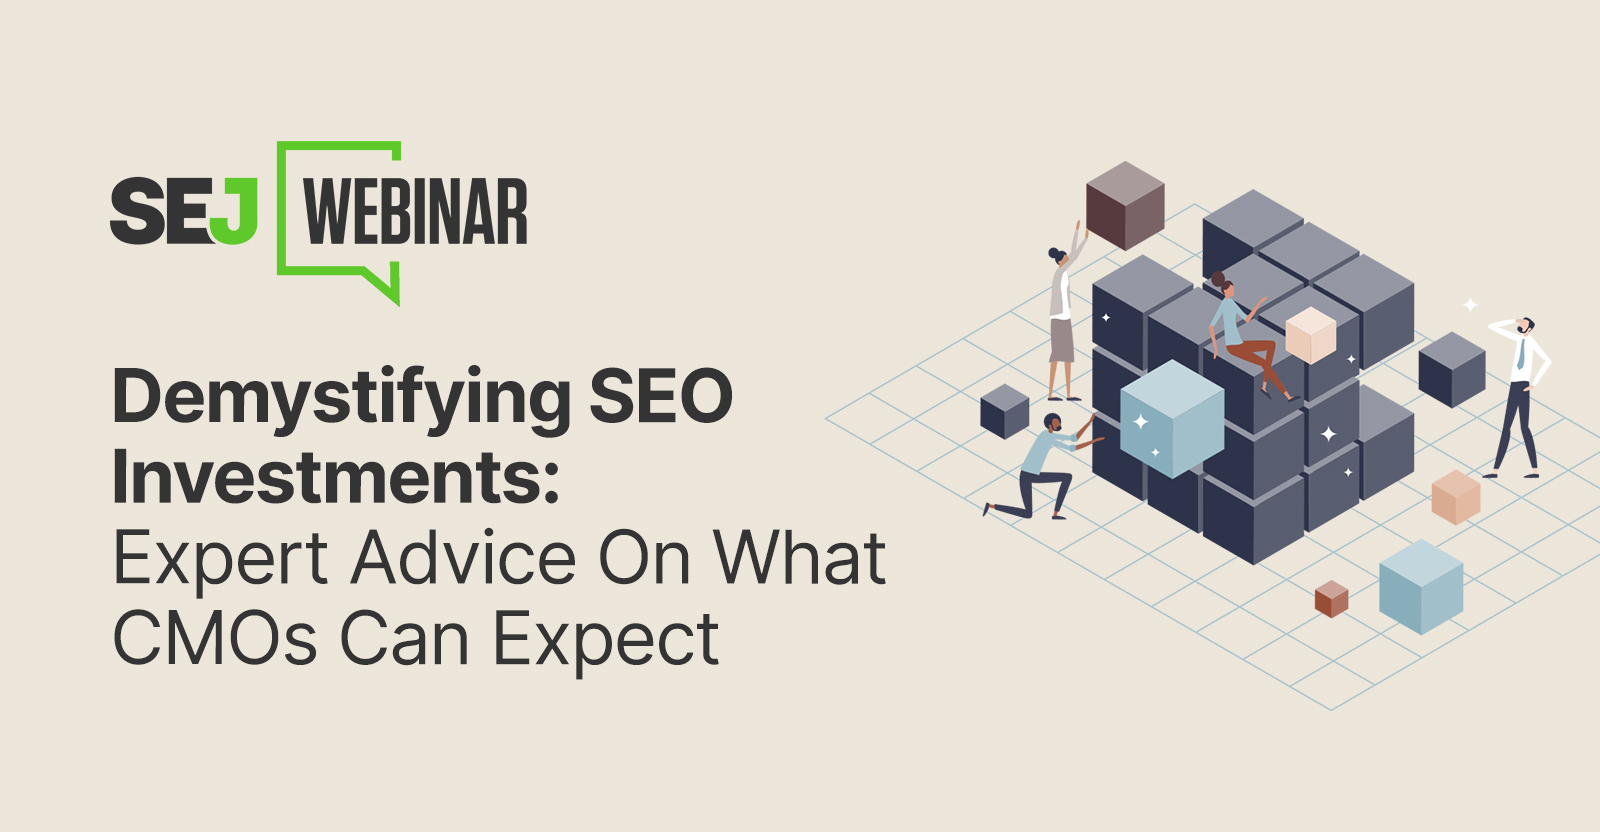 Demystifying SEO Investments: Expert Advice For CMOs [Webinar]